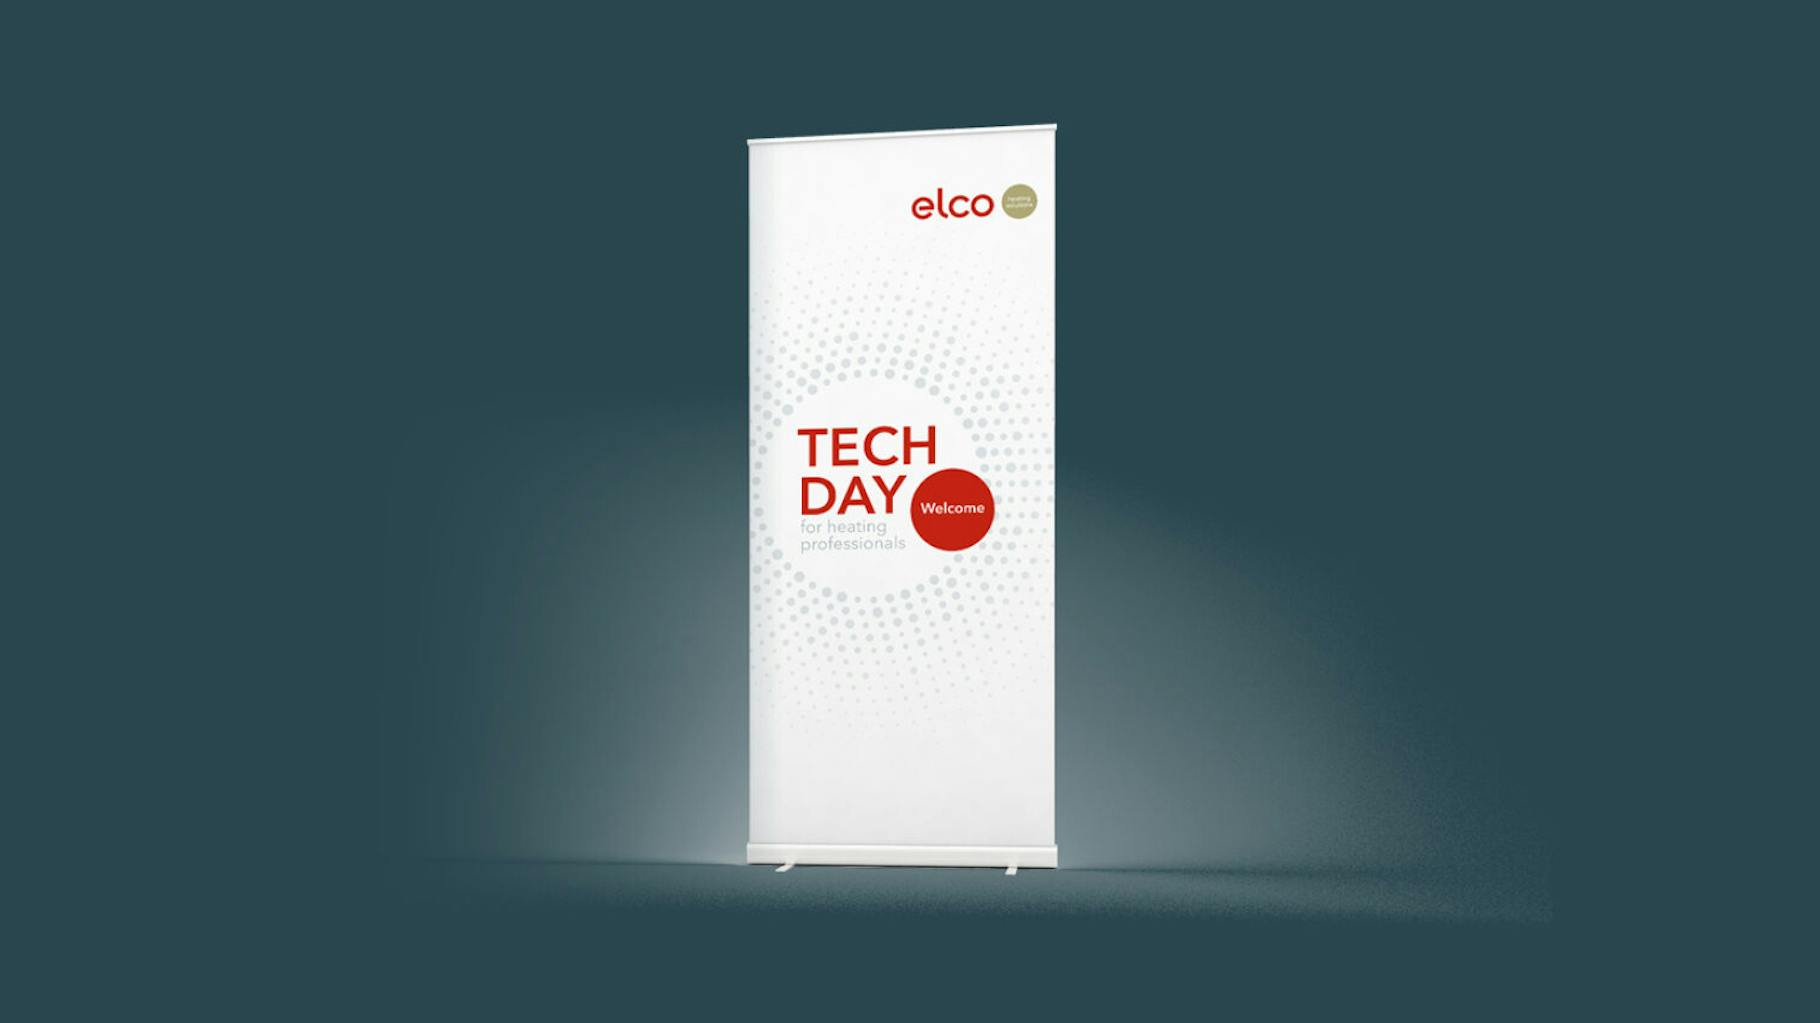 A banner promoting the ELCO Tech Day 